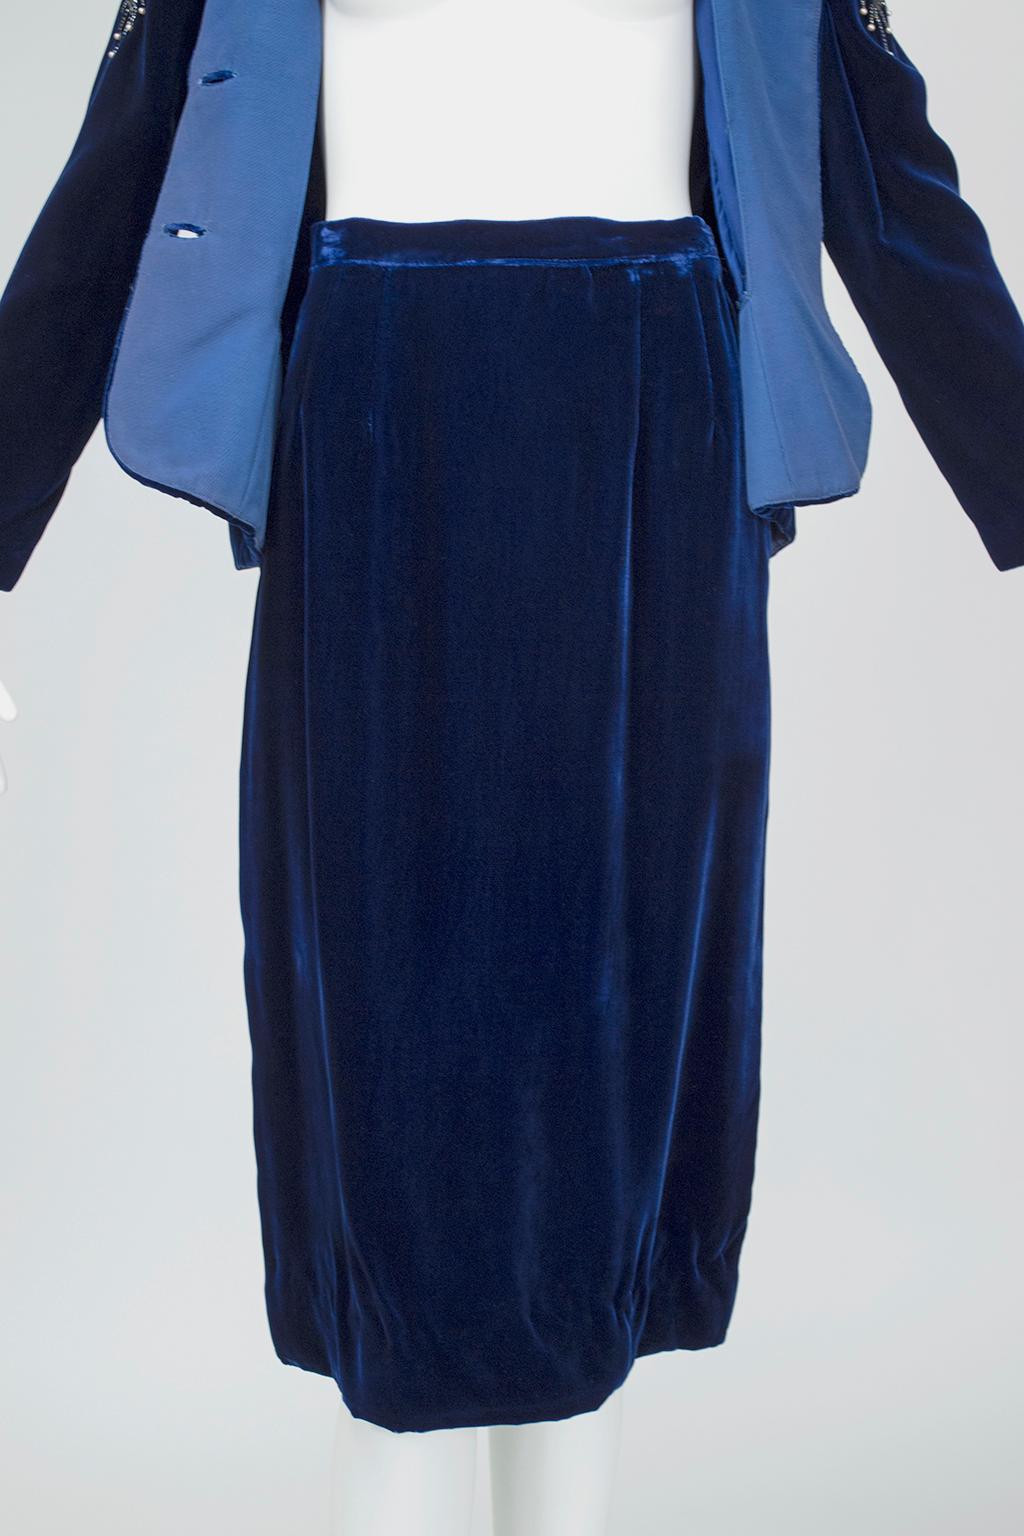 Schiaparelli-Inspired Sapphire Silk Velvet Bead and Pearl Pencil Suit - S, 1940s For Sale 2